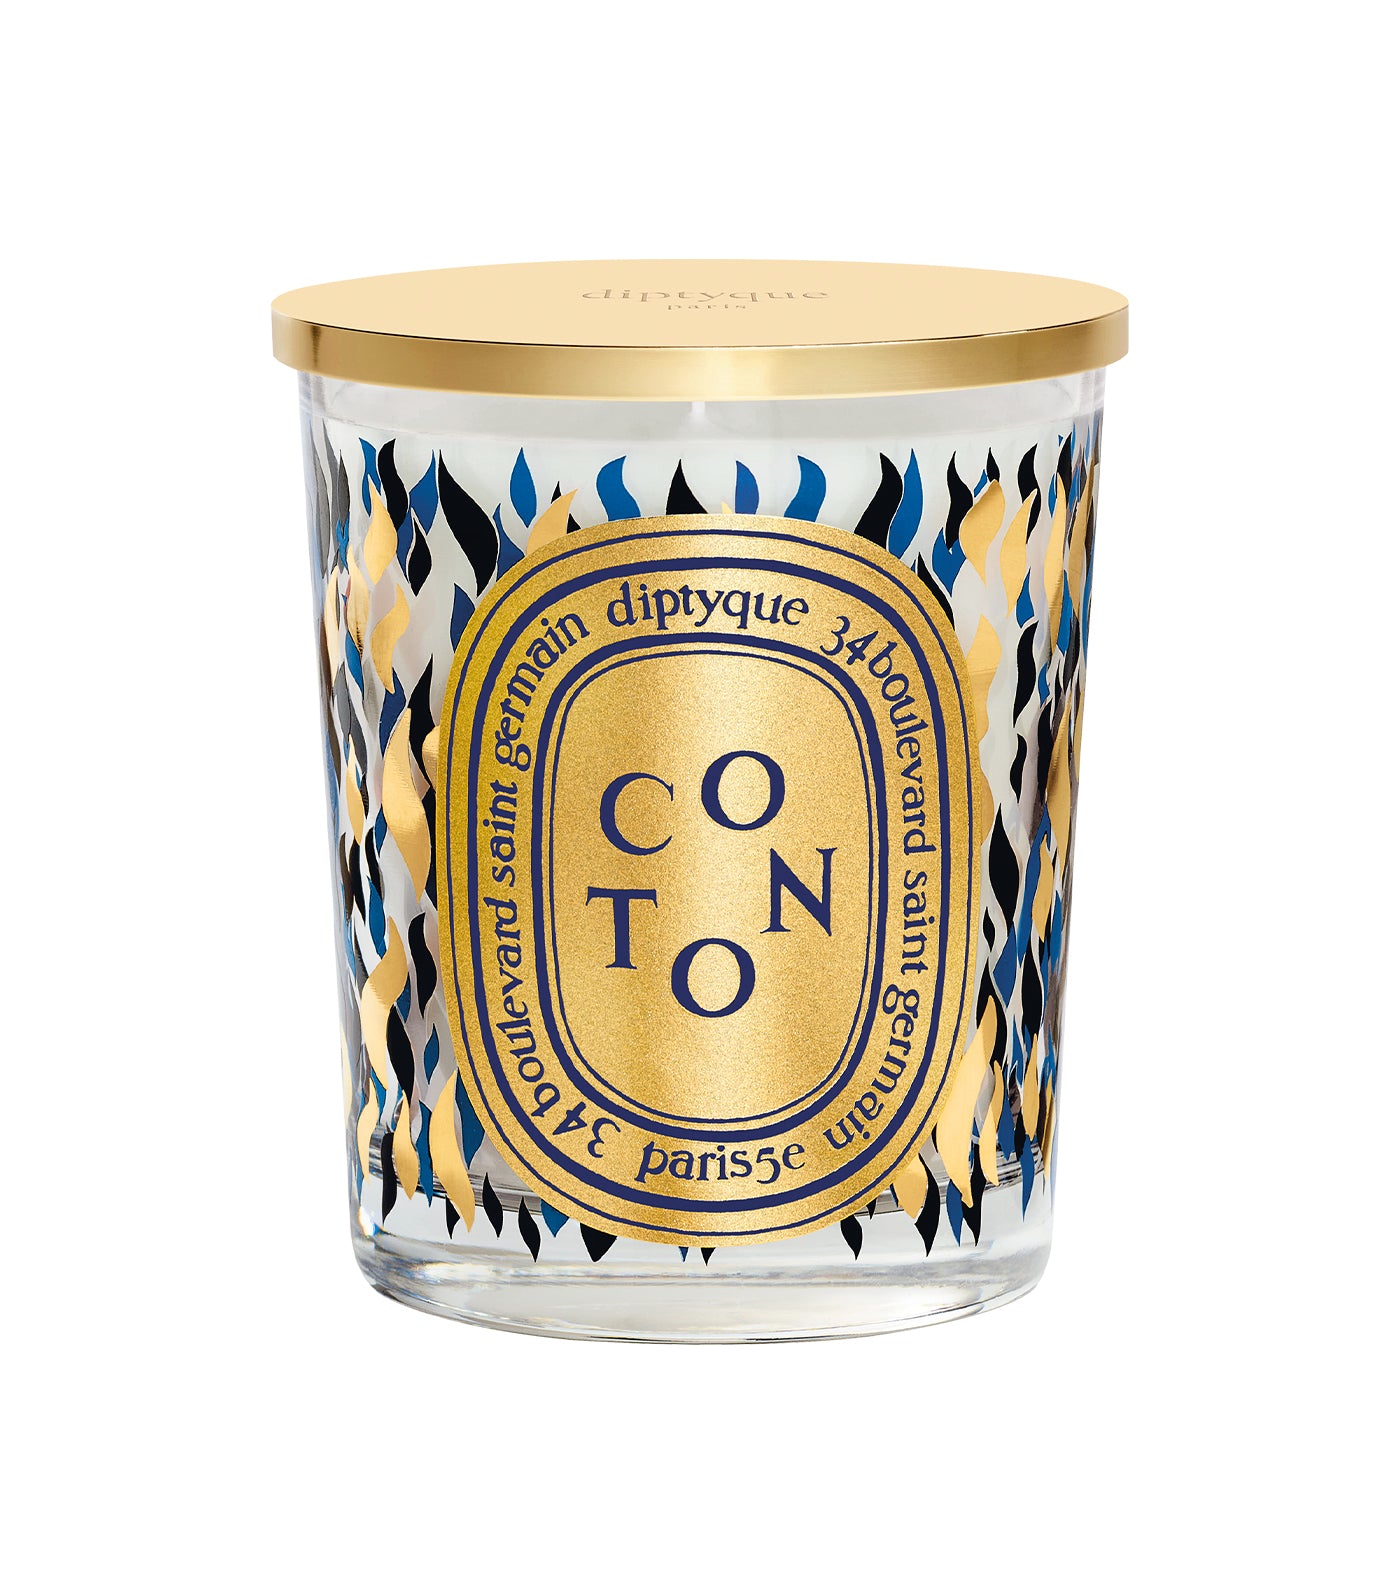 Cotton / Coton Limited Edition Candle